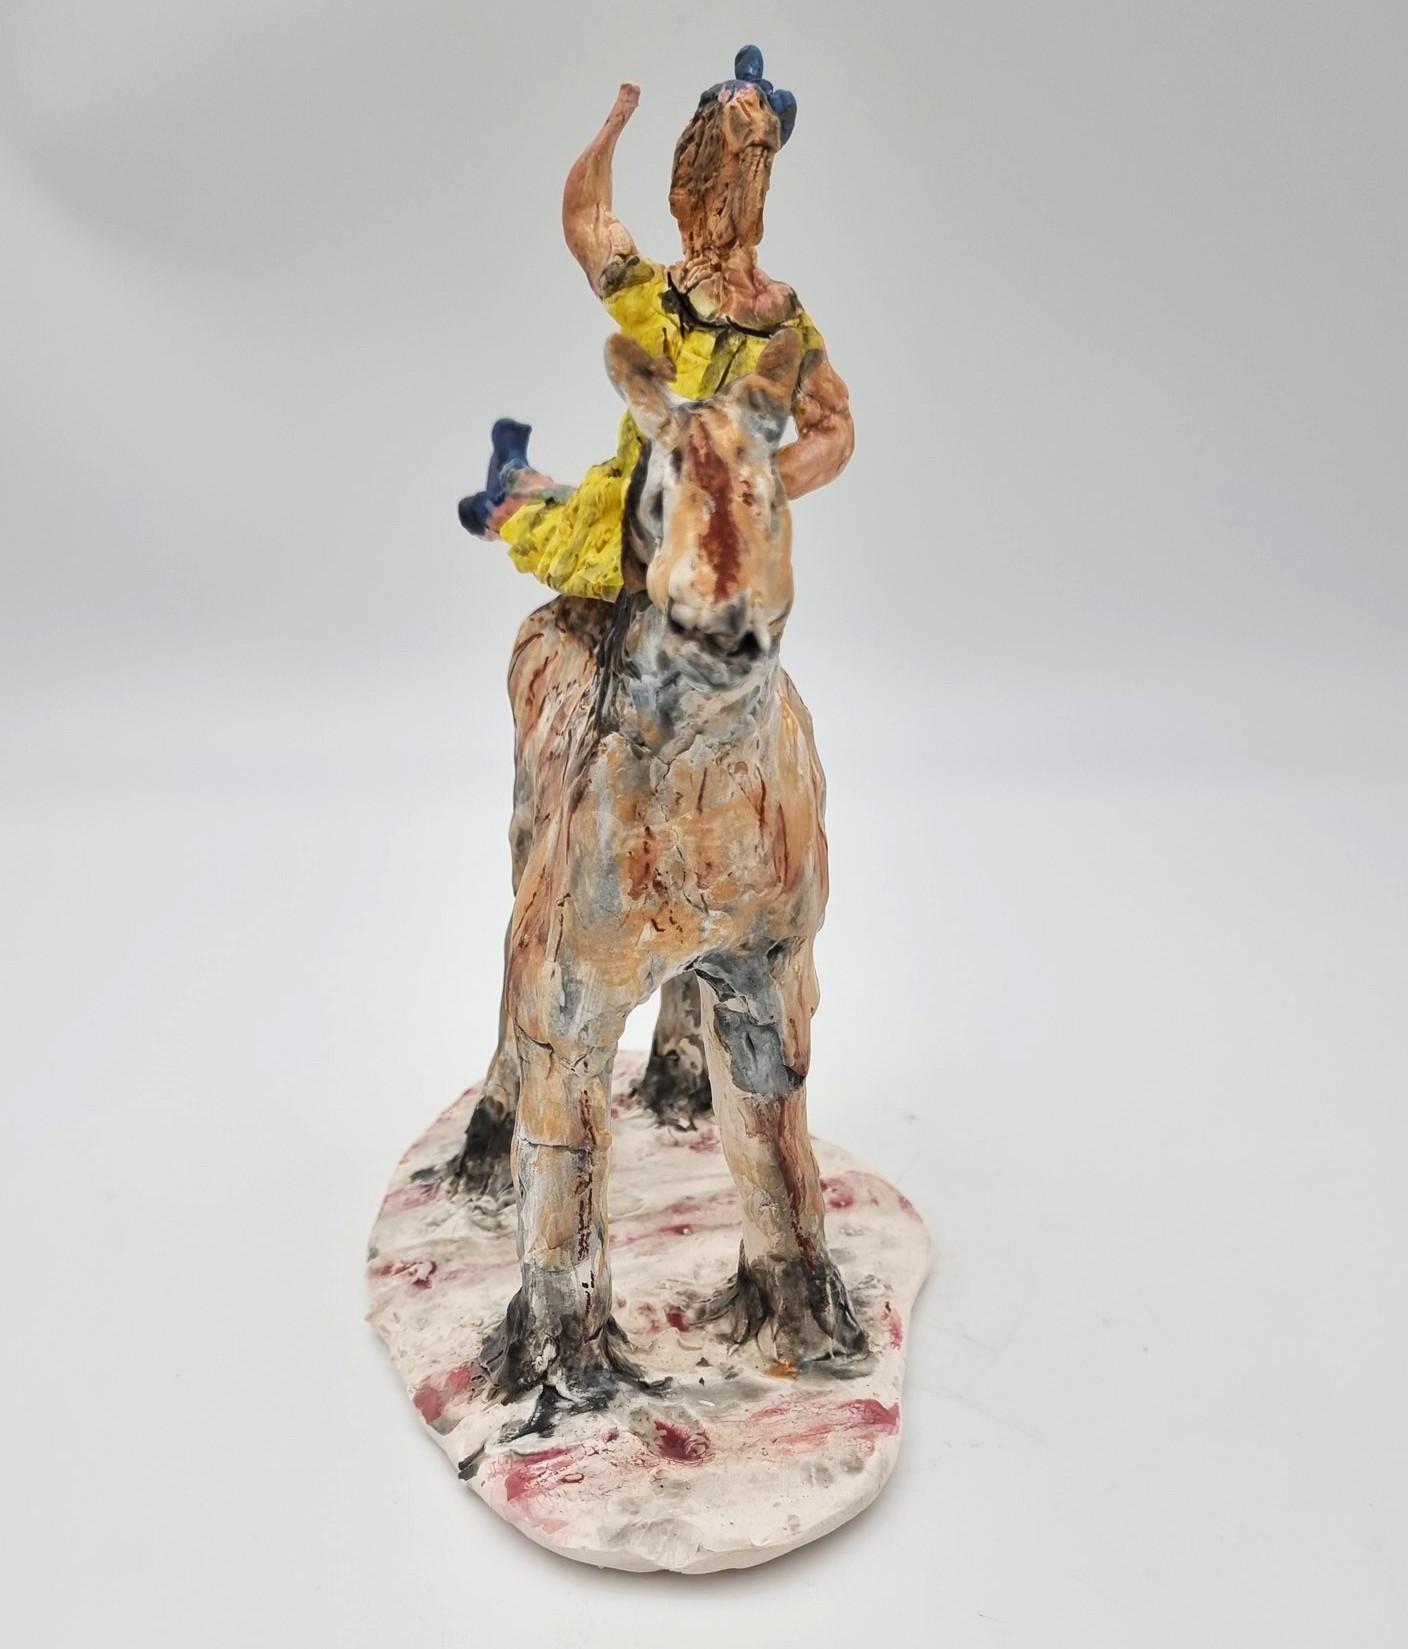 Ann Rothman
Female Acrobat on Horseback (Circus, Whimsical, Viola Frey, Delicate, Playful, Fun, Cirque du Soleil, The Ringling Bros., Barnum & Bailey)
2021
Porcelain, Low Fire Glazes, Crayons, Watercolors
Fired Cone 06, 04
9.25 x 5 x 8.5 inches
COA